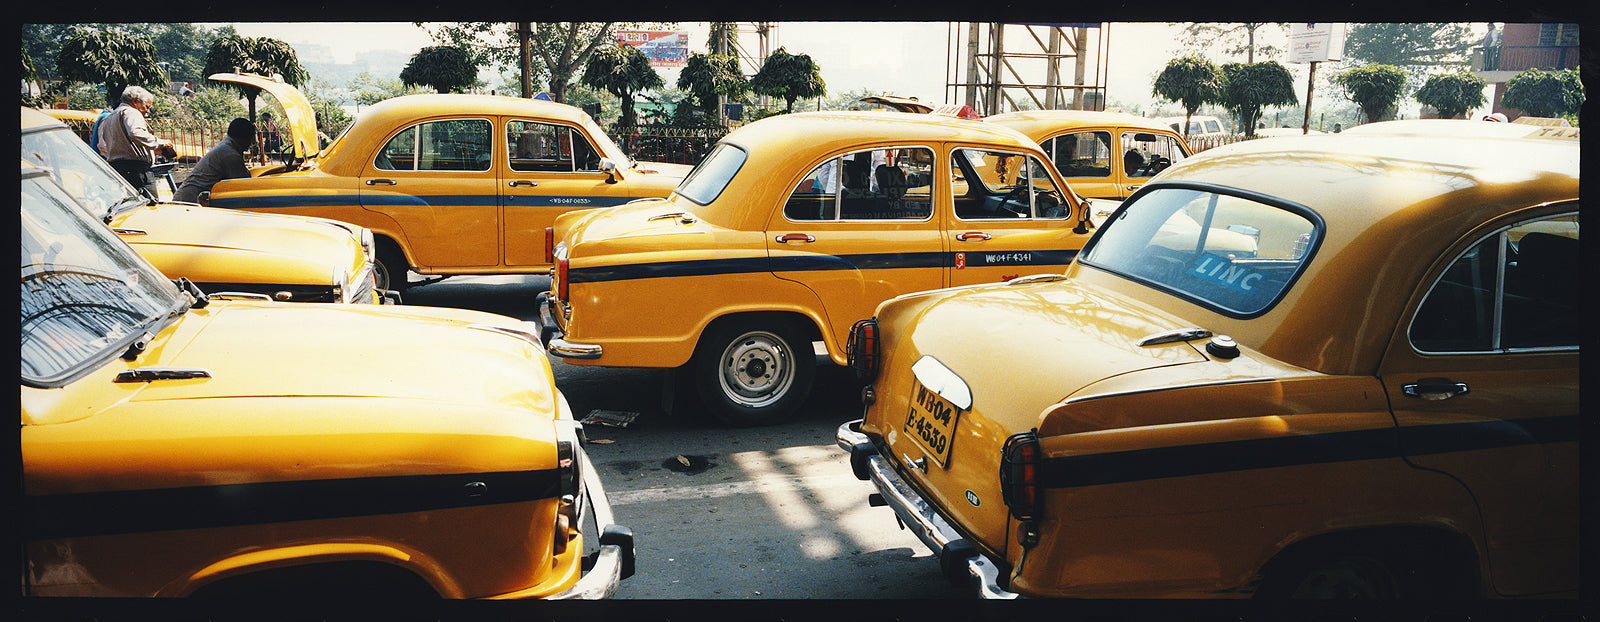 Parked Taxis, Kolkata, West Bengal, 2013